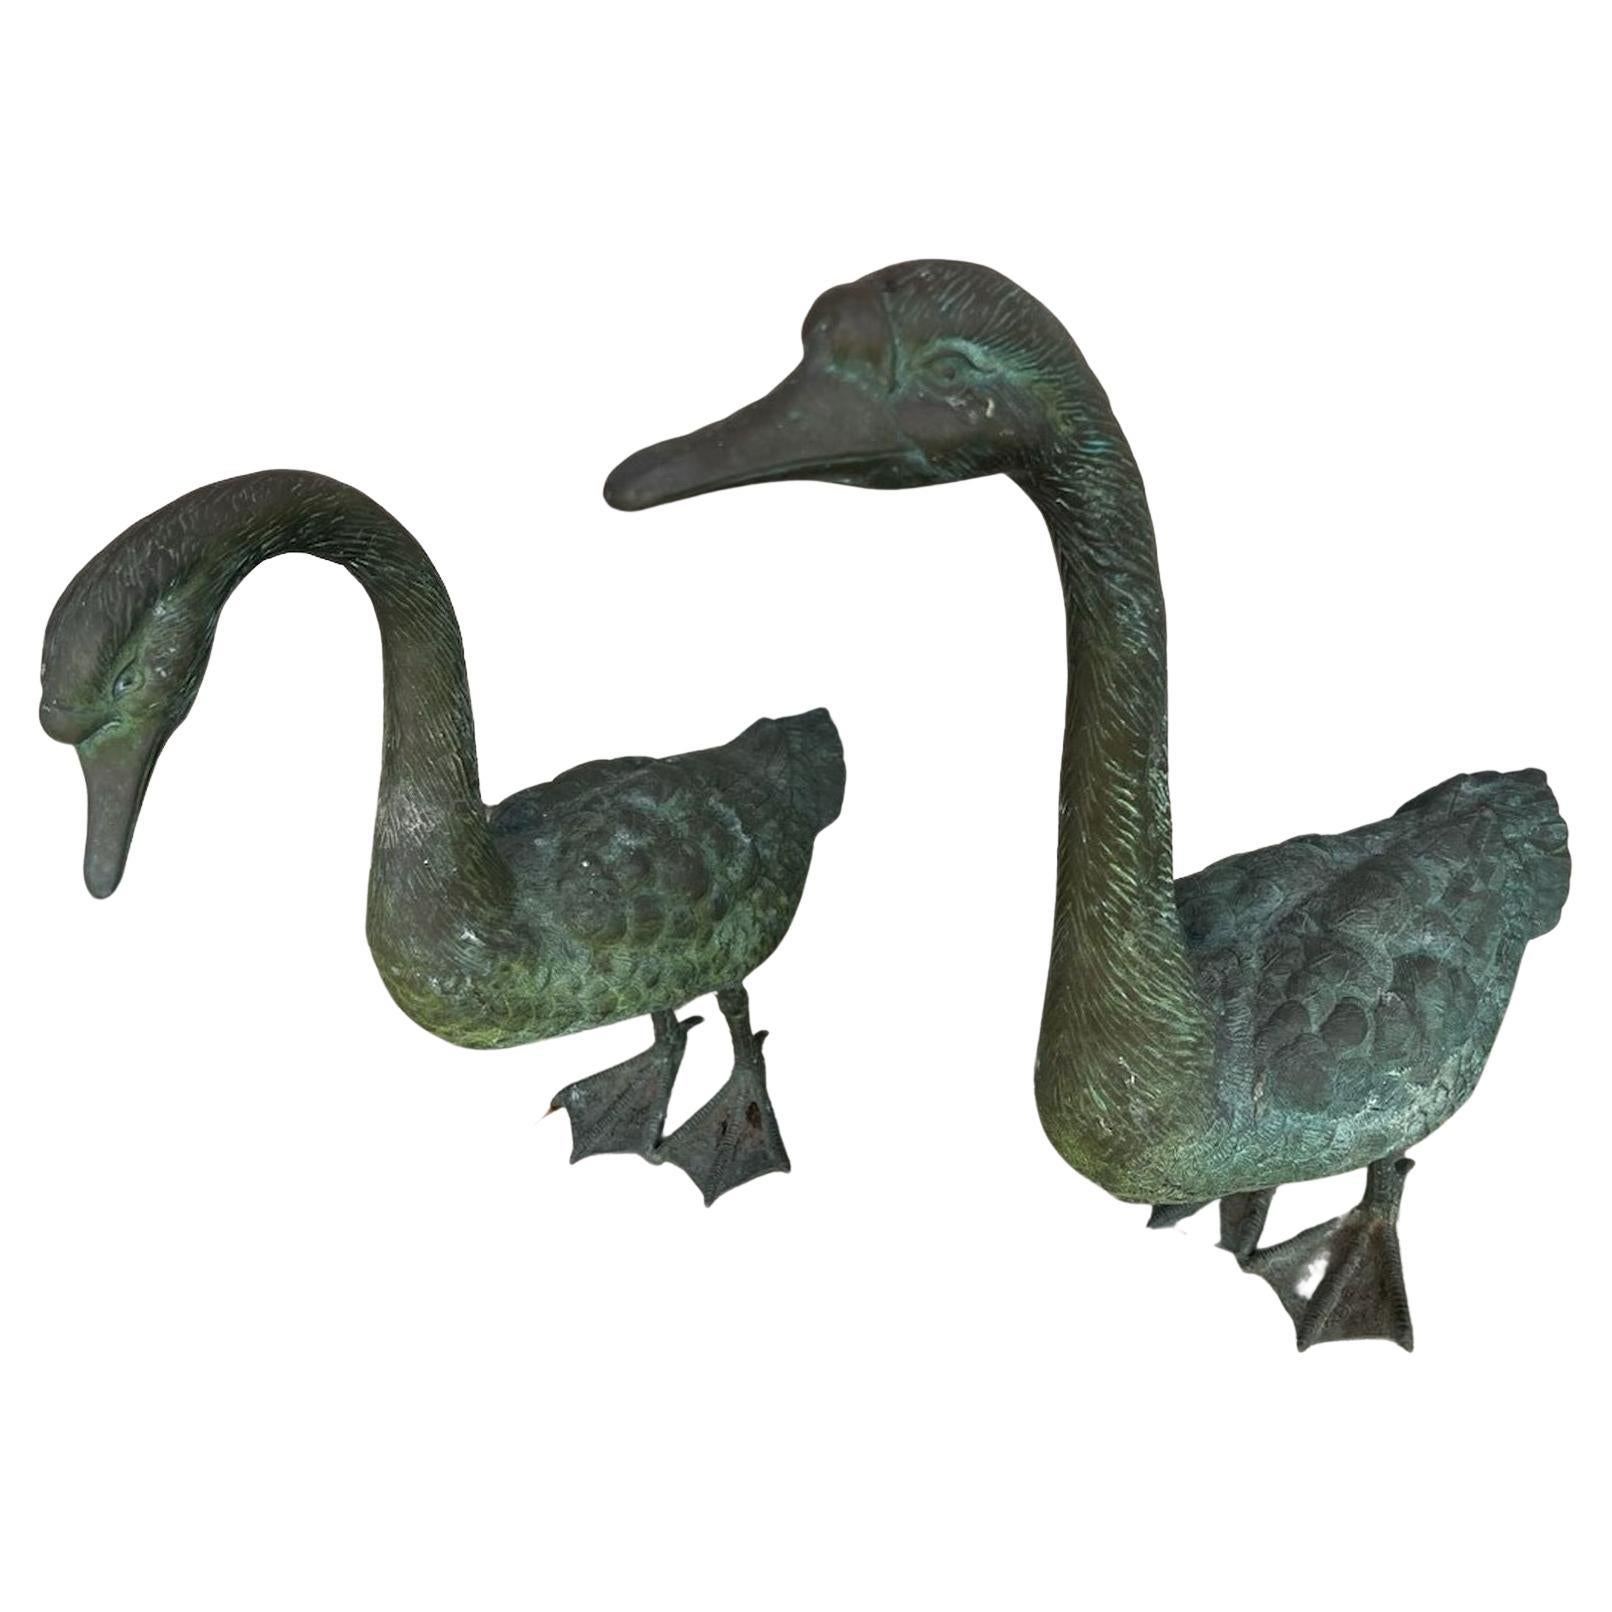 19Thc Original patinated bronze rare standing ducks from a outdoor garden in very fine condition. These amazing undisturbed surface ducks are amazing.Sold as a matching pair only.